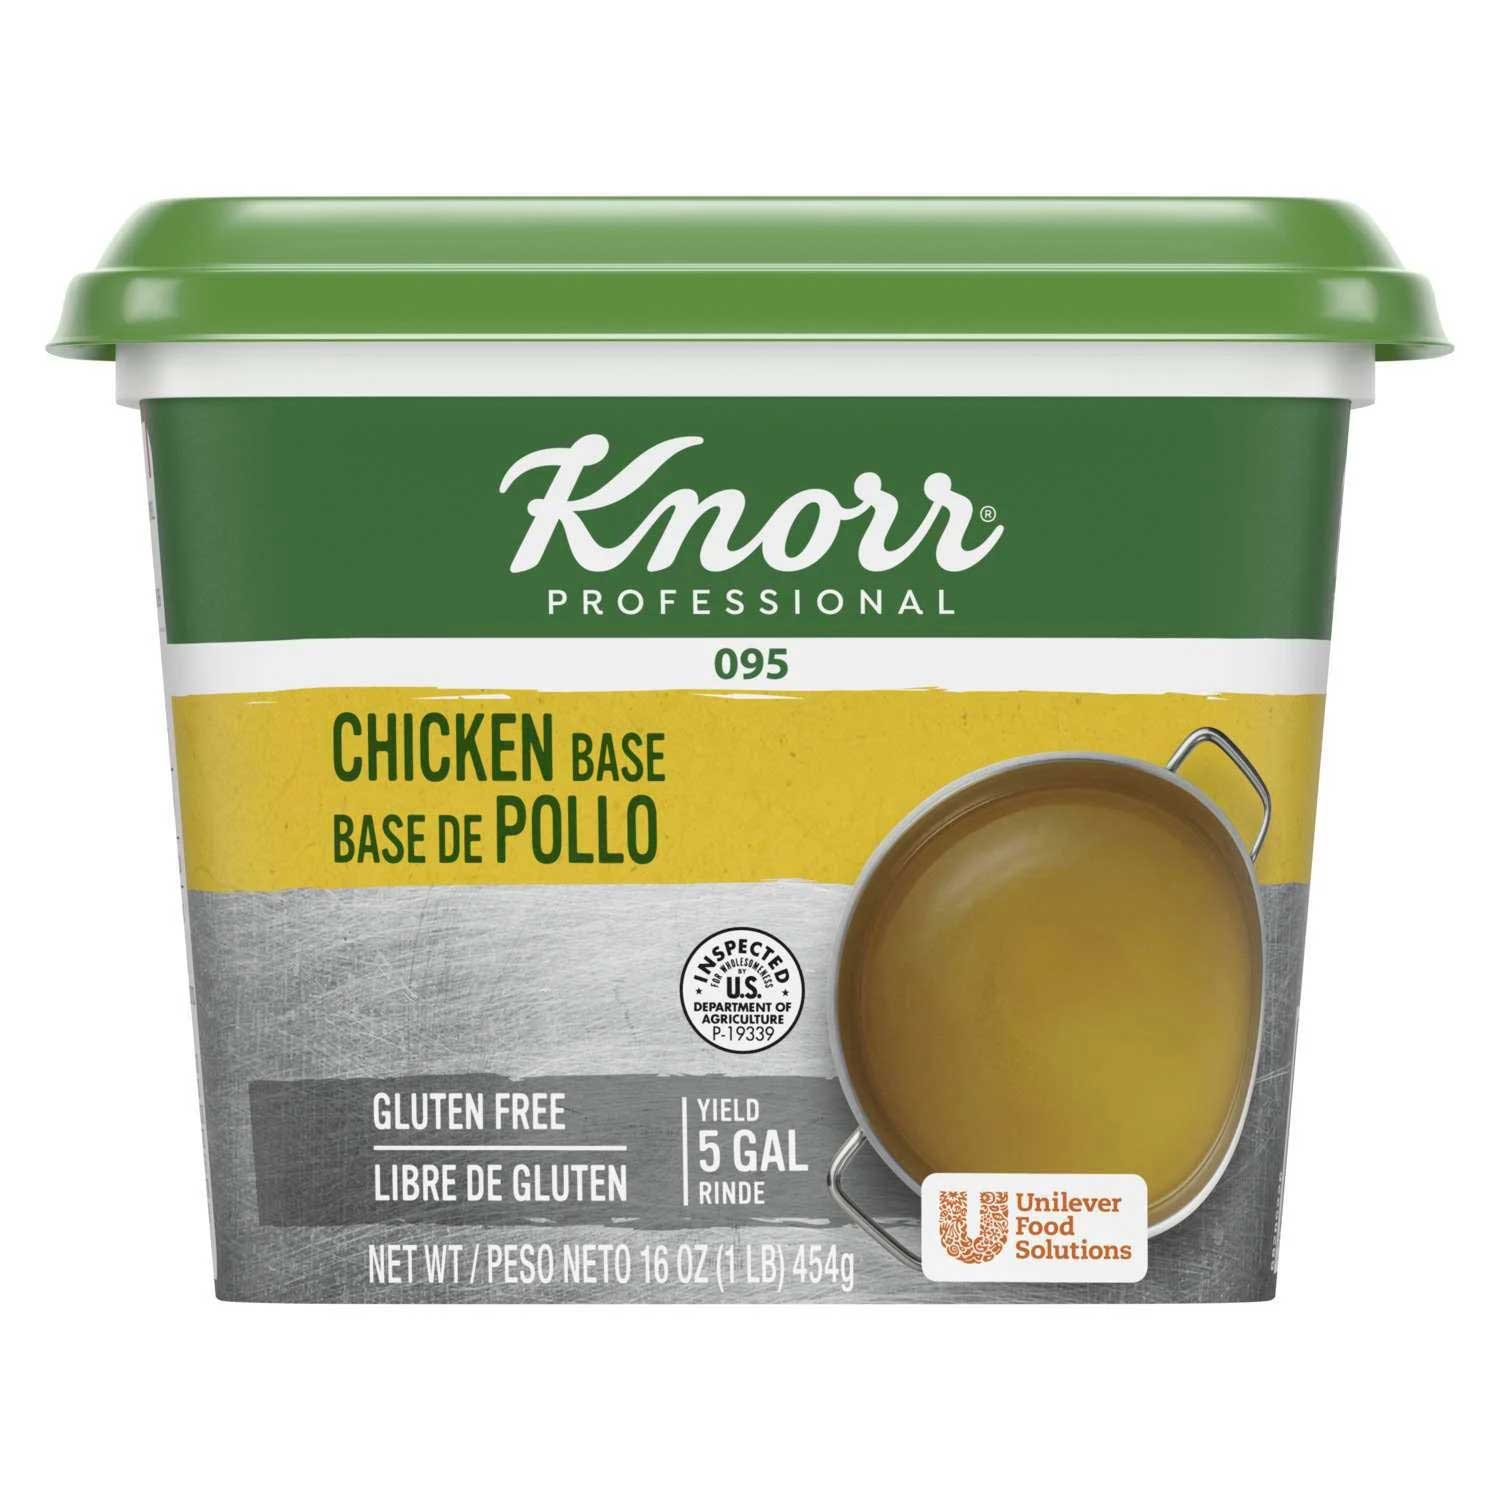 Knorr Professional 095 Chicken Stock Base, 1 pound -- 12 per case